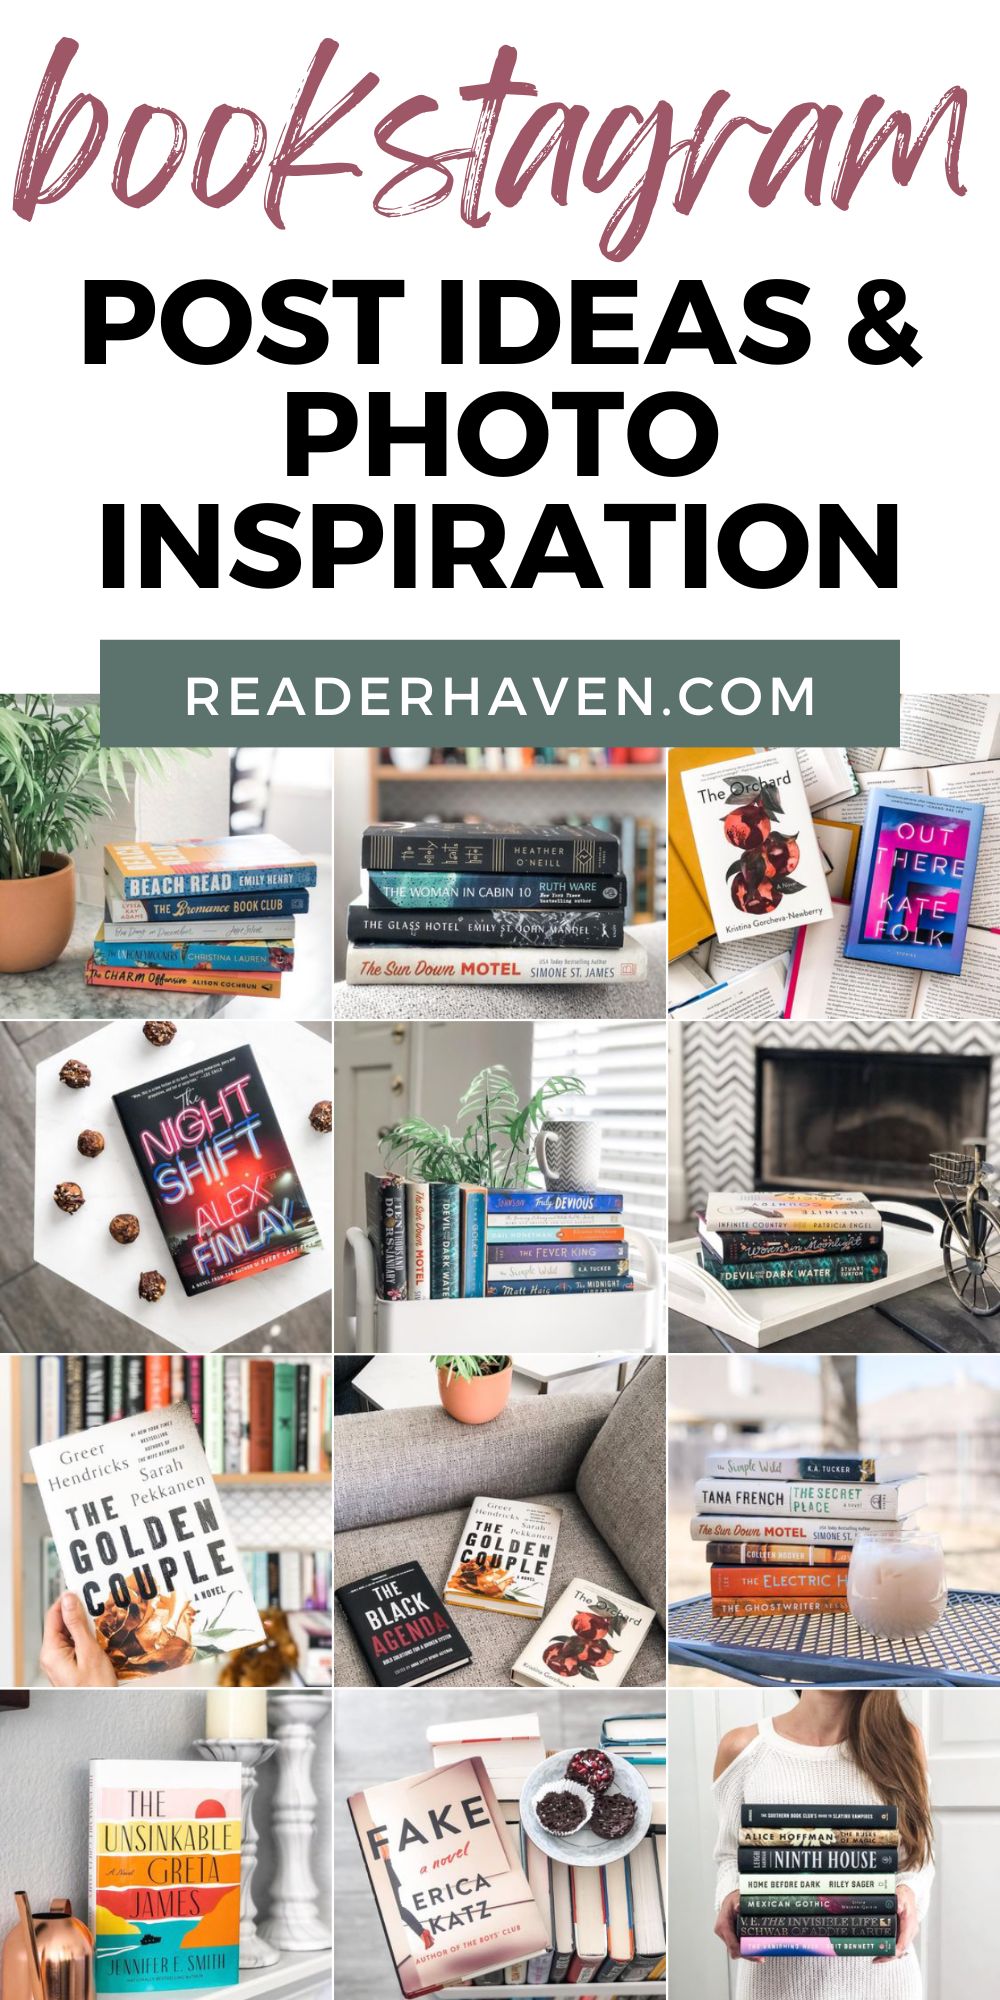 Bookstagram post ideas and photo inspiration